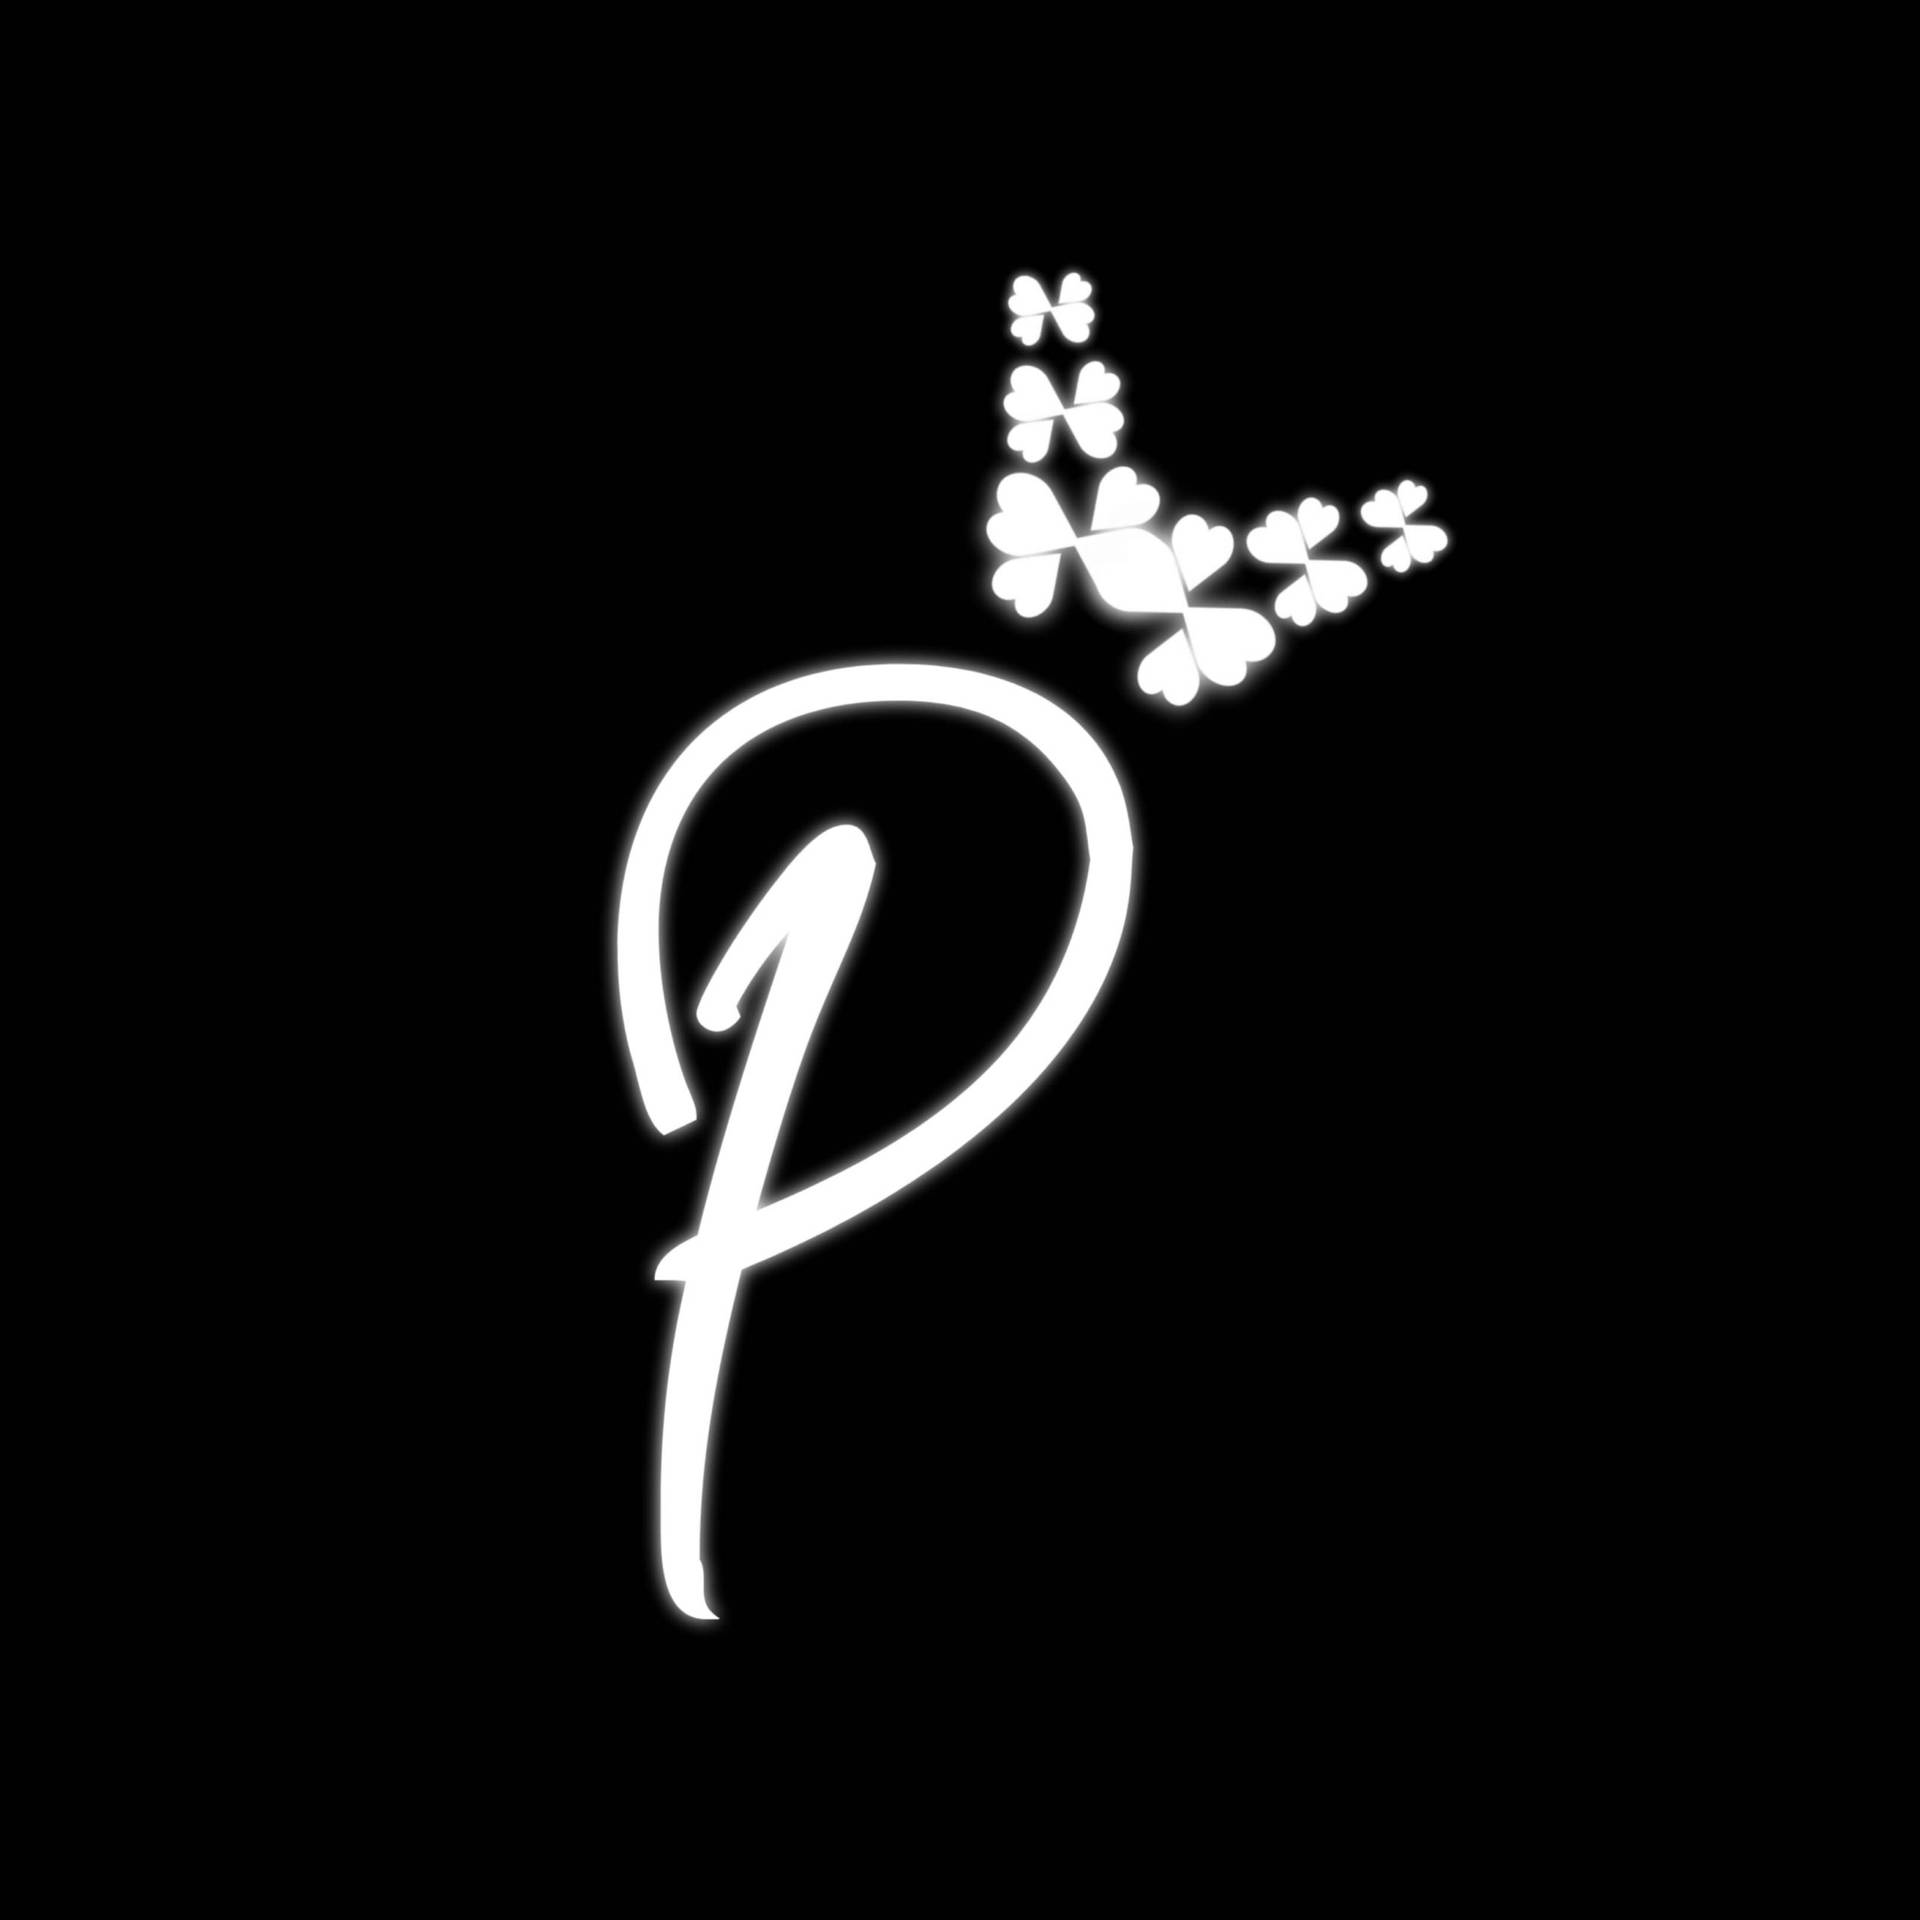 Glowing Letter P Background